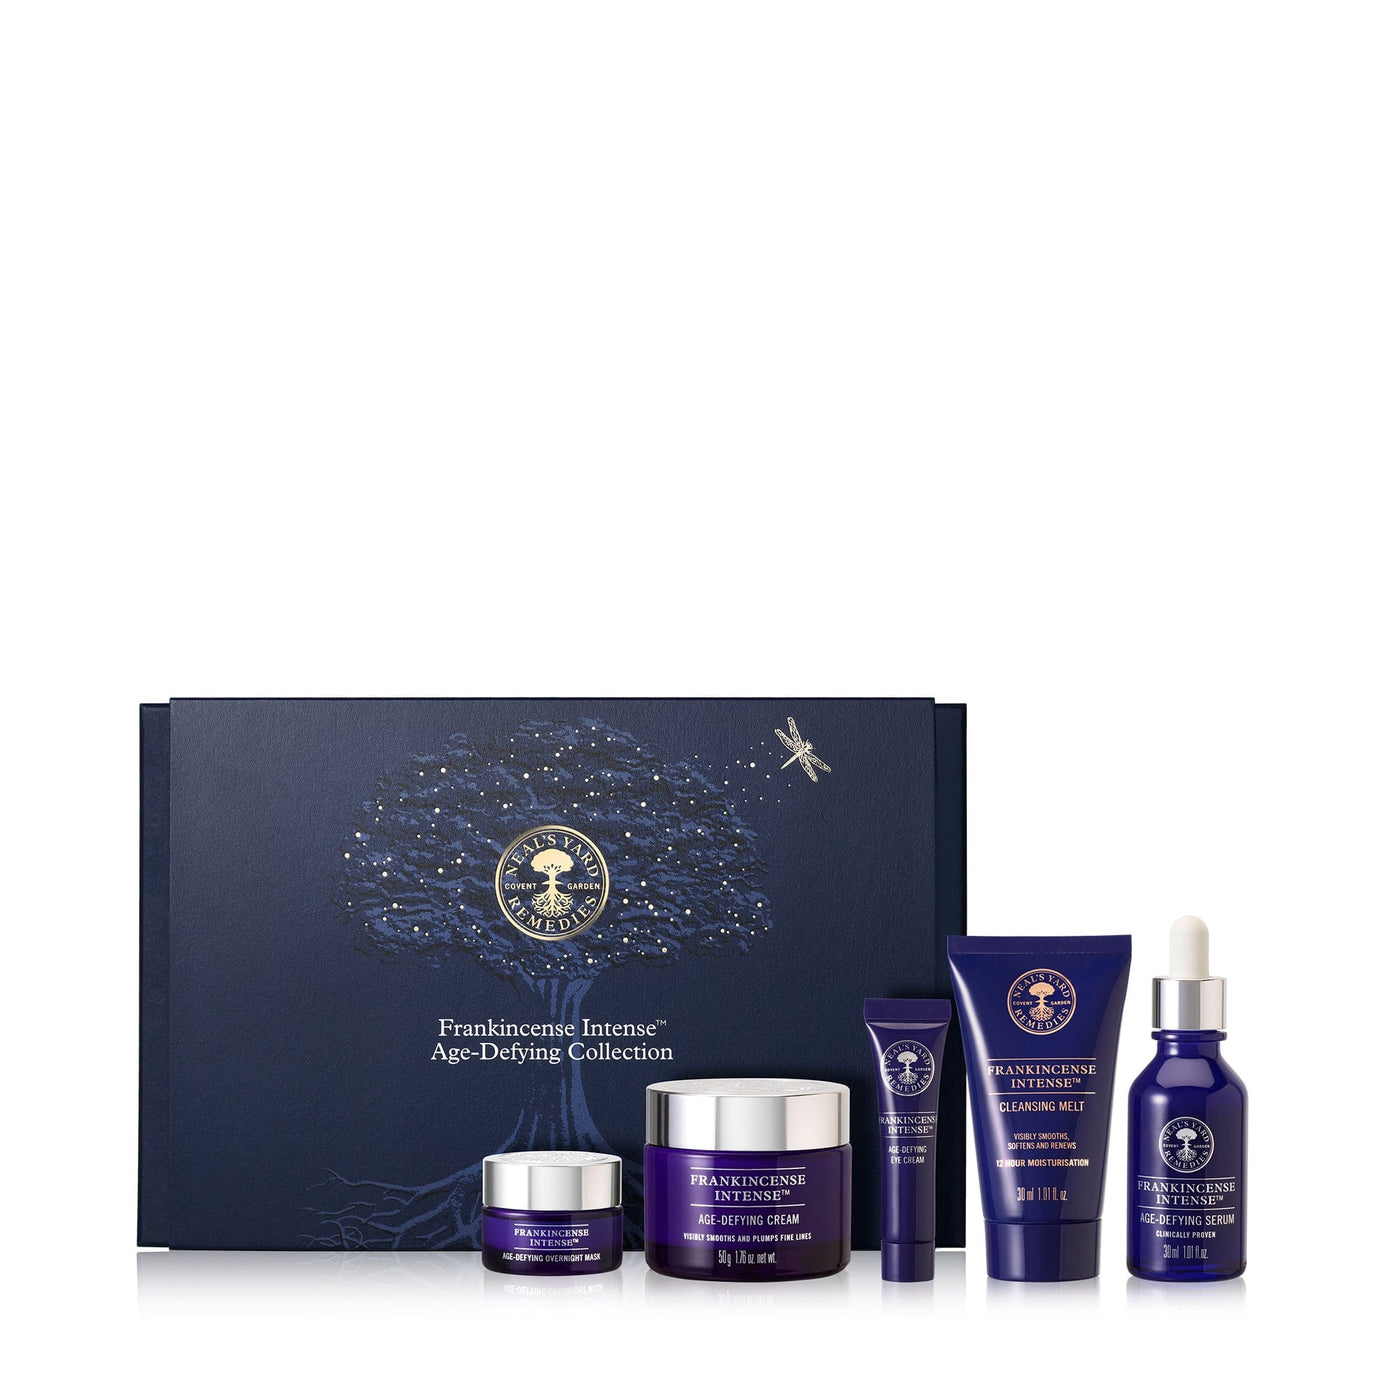 Neal's Yard Remedies Frankincense Intense™ Age-Defying Collection